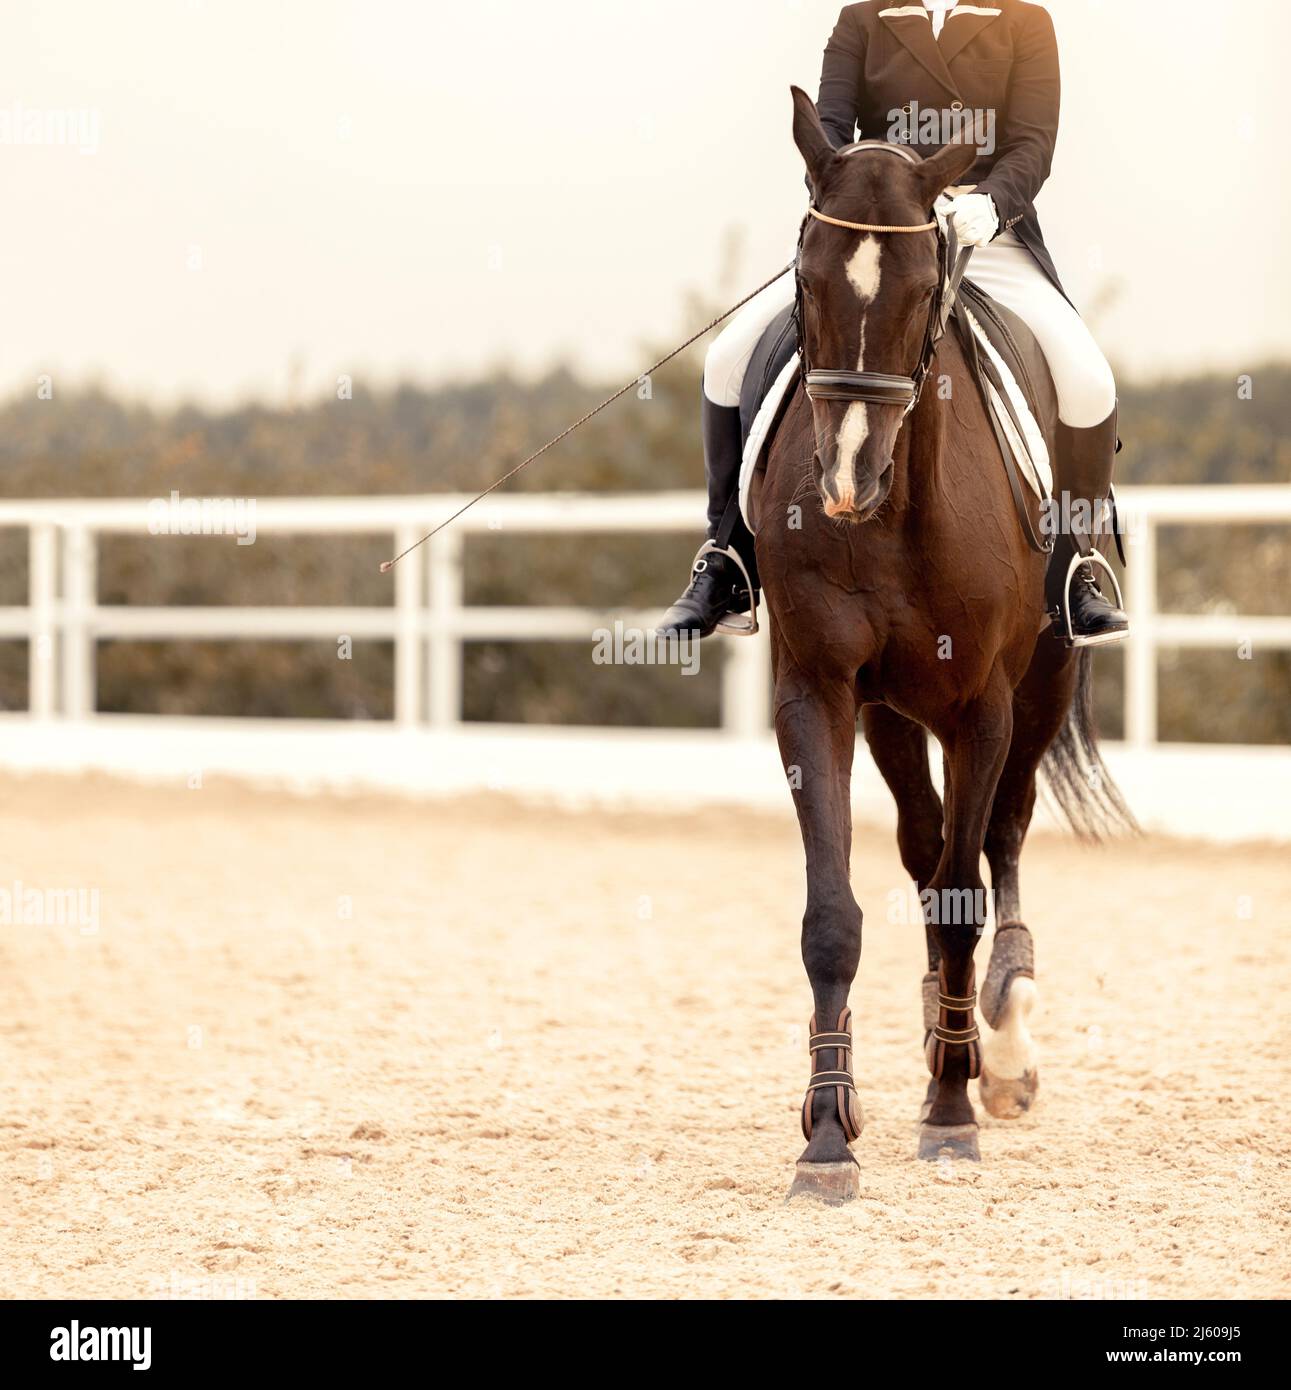 Classic Dressage horse. Portrait red horse in training. Equestrian sport. Front view. Sports stallion in the bridle. The leg of the rider in the Stock Photo